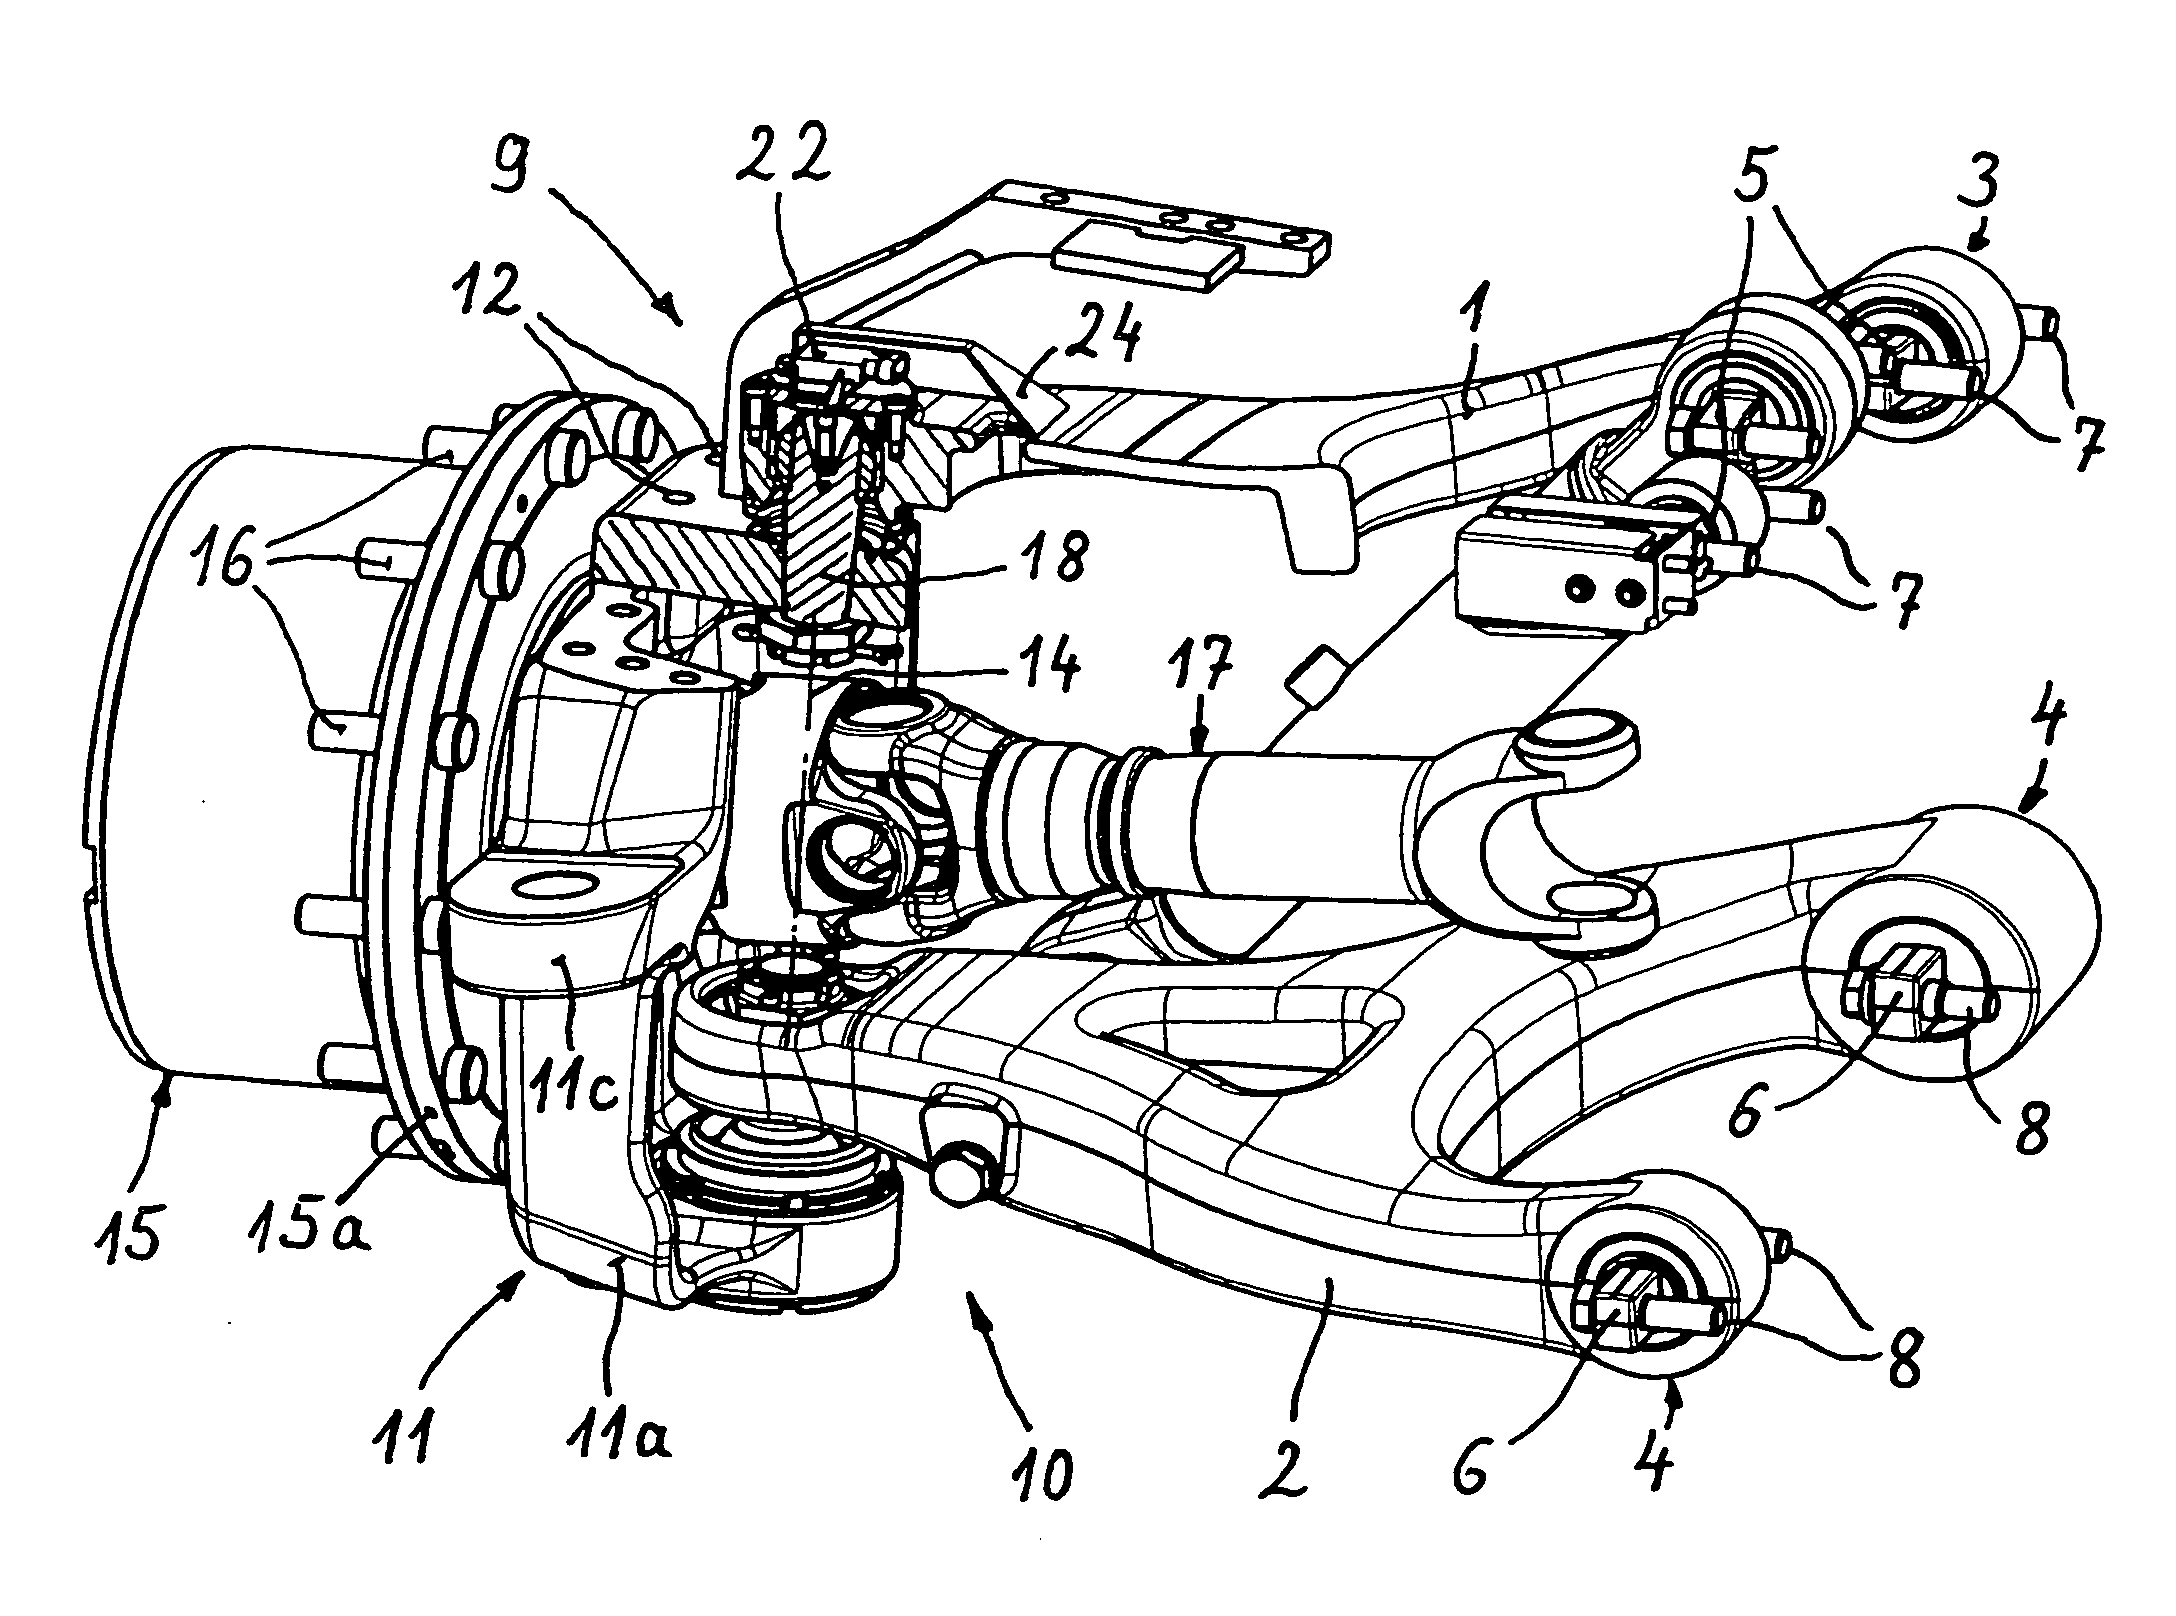 Steering systems